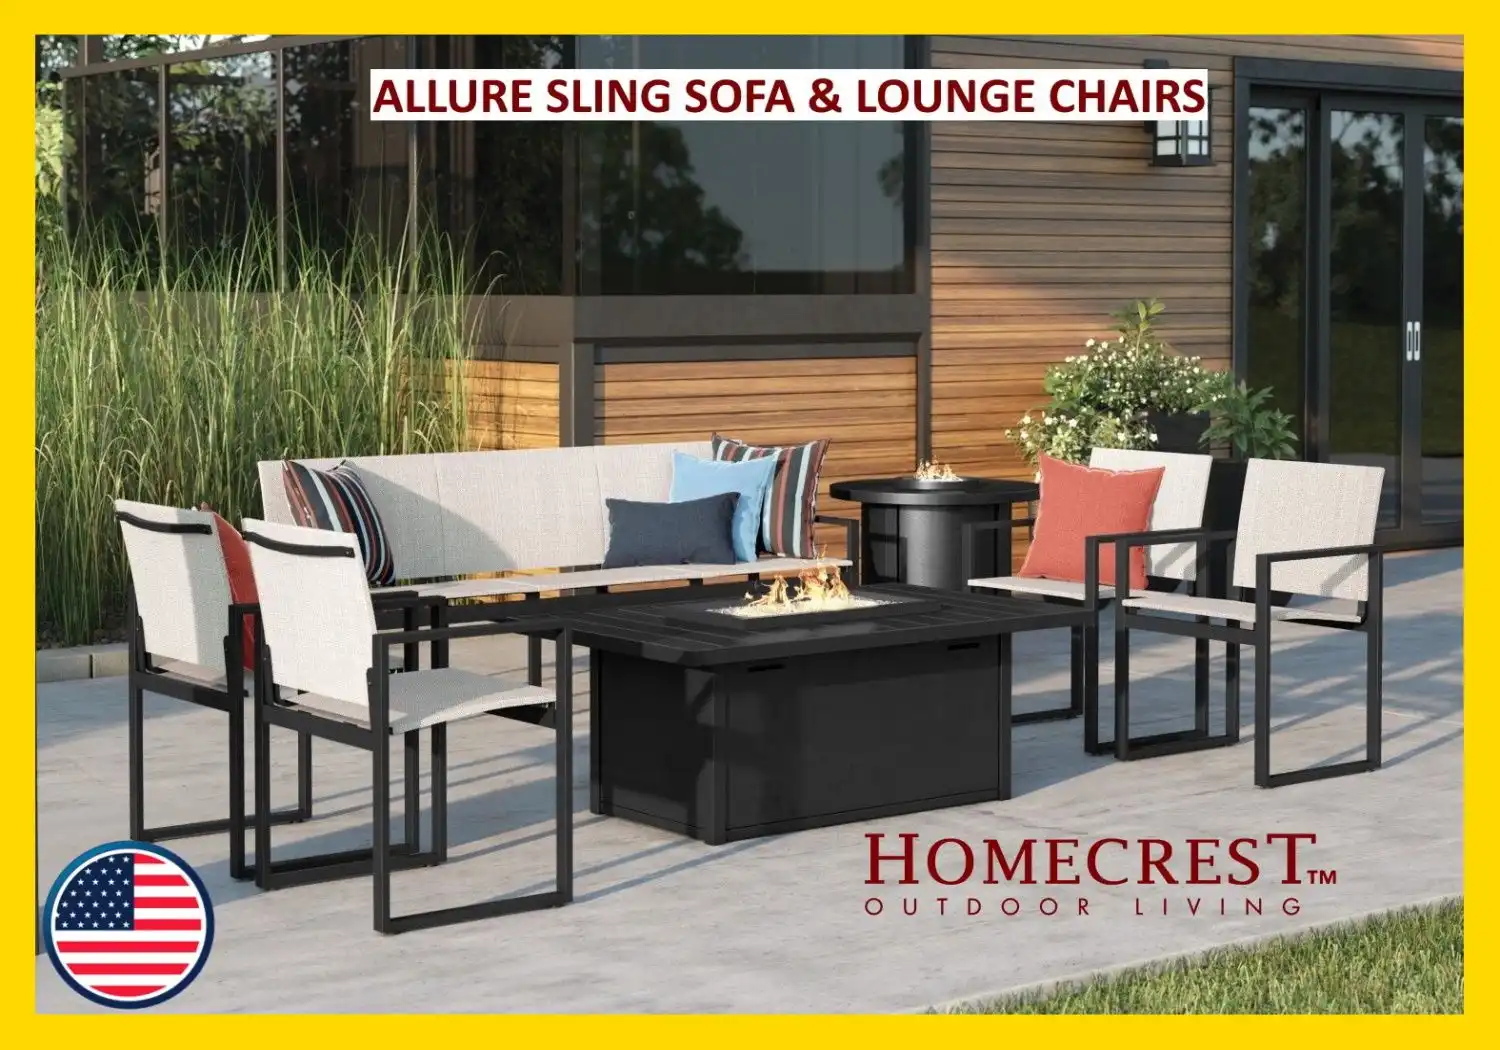 ALLURE SLING SOFA & LOUNGE CHAIRS